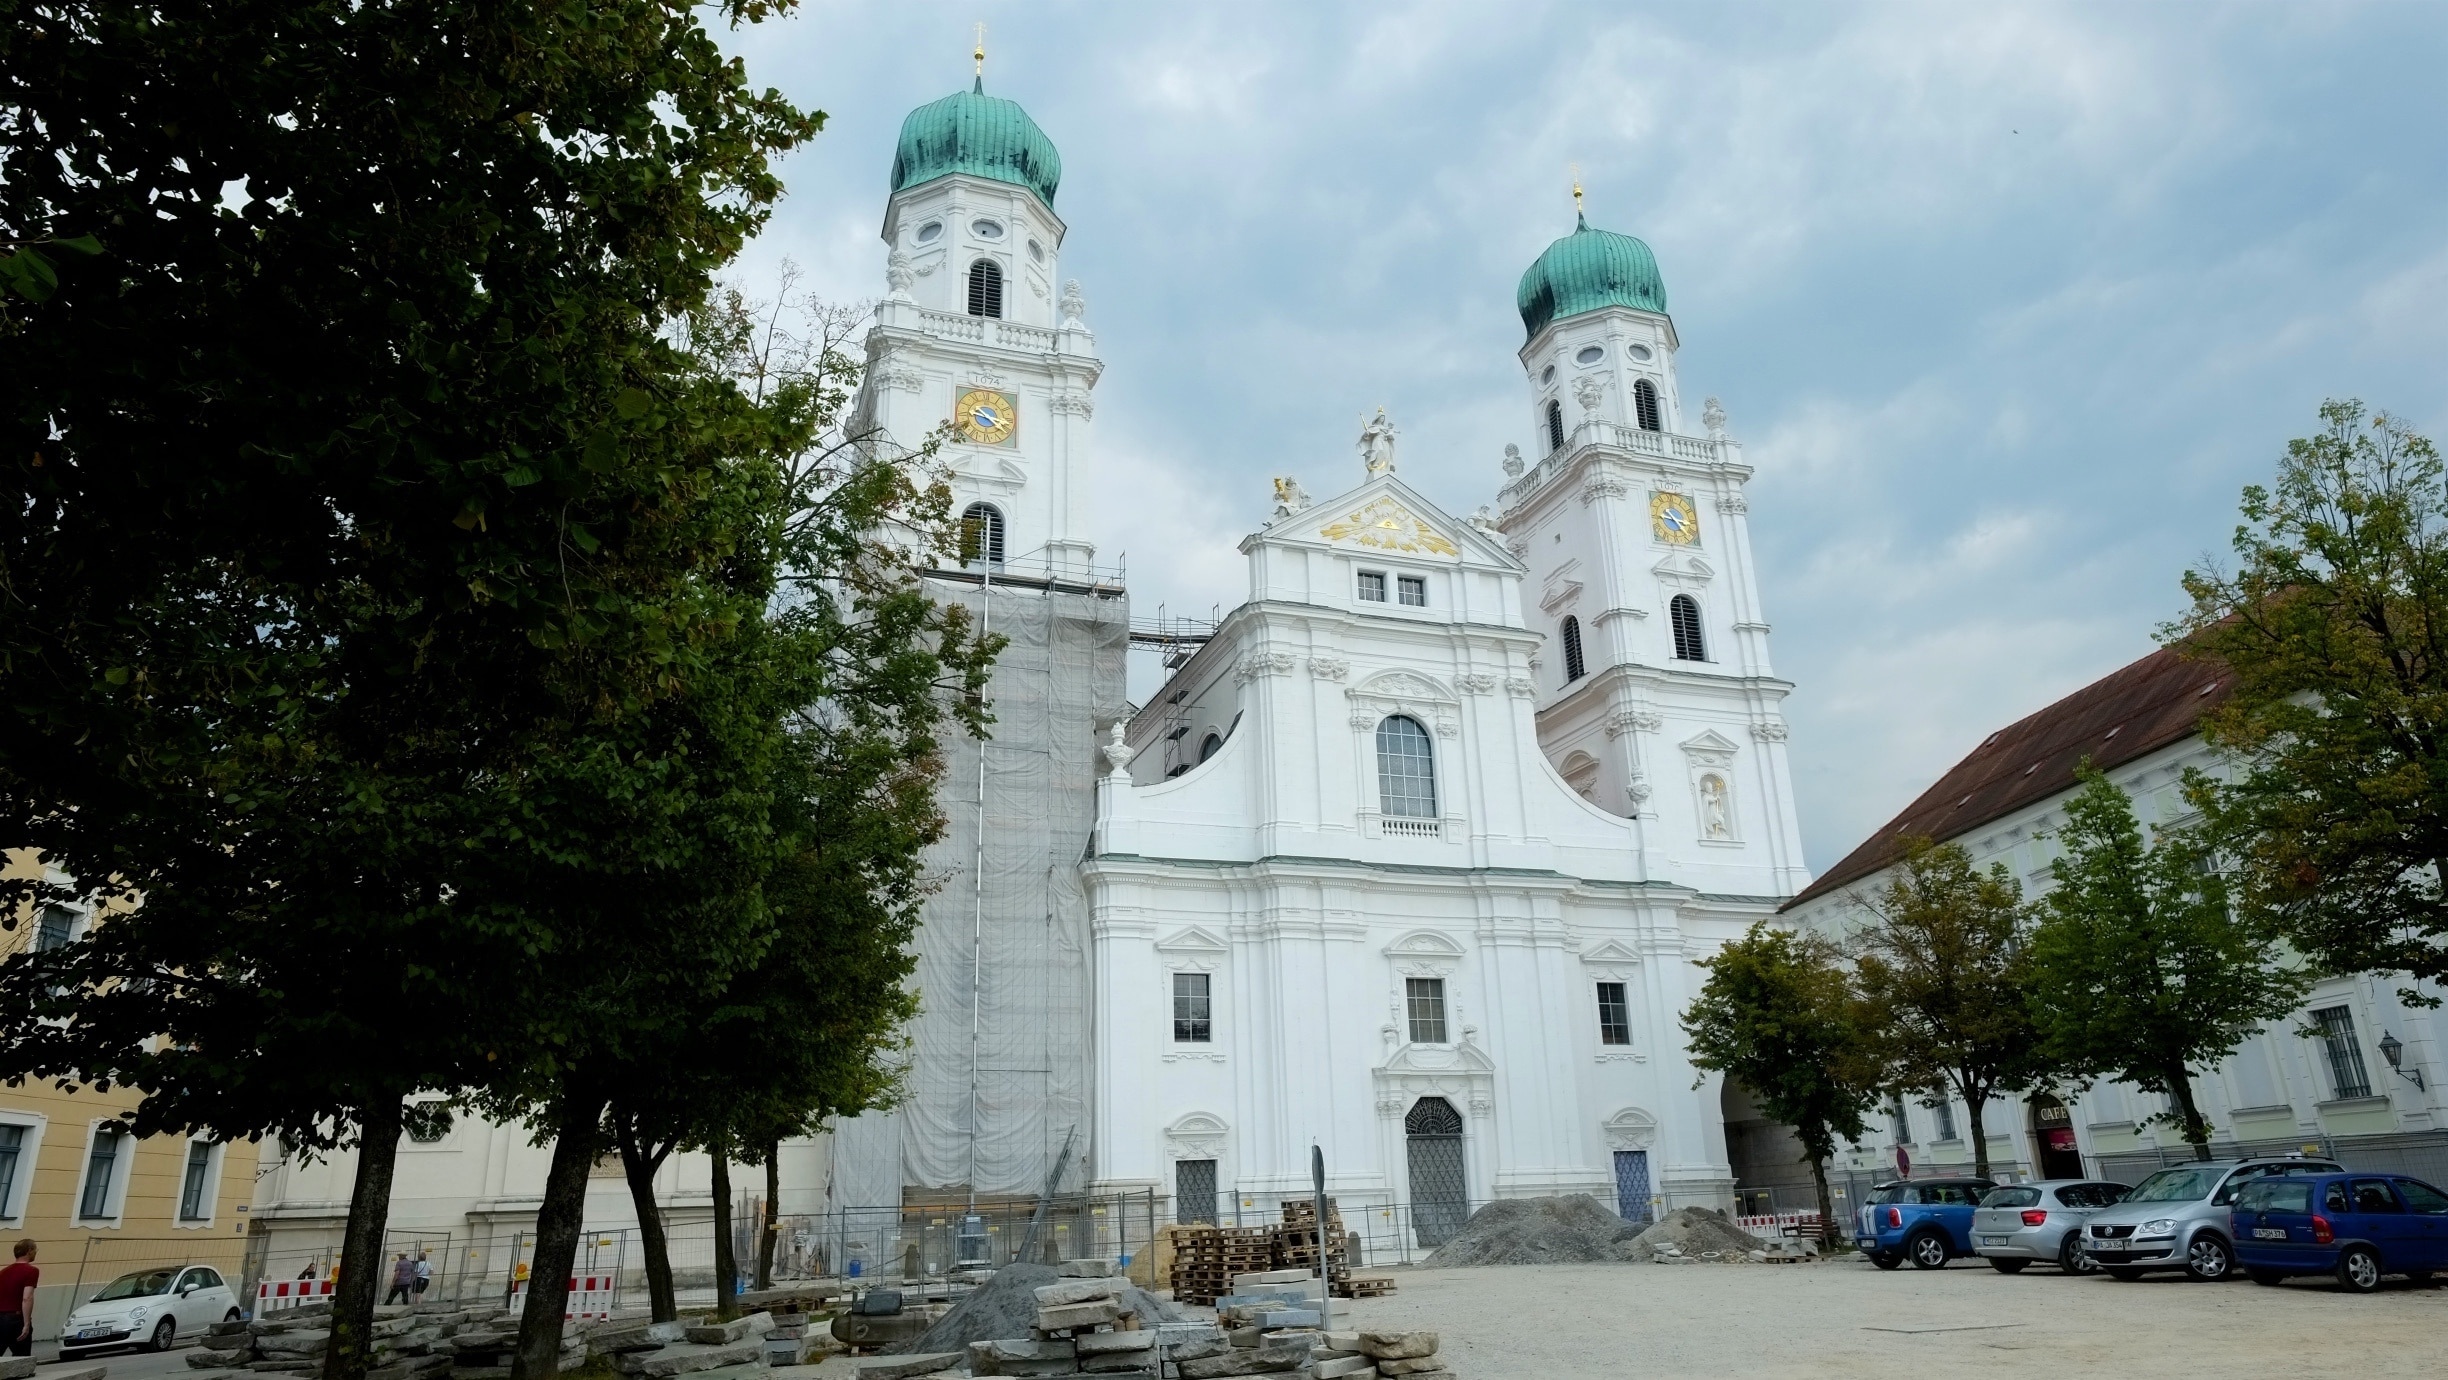 St. Stephen's Cathedral is a baroque church from 1688 in Passau, Germany, dedicated to Saint Stephen. It is the seat of the Catholic Bishop of Passau and the main church of his diocese.